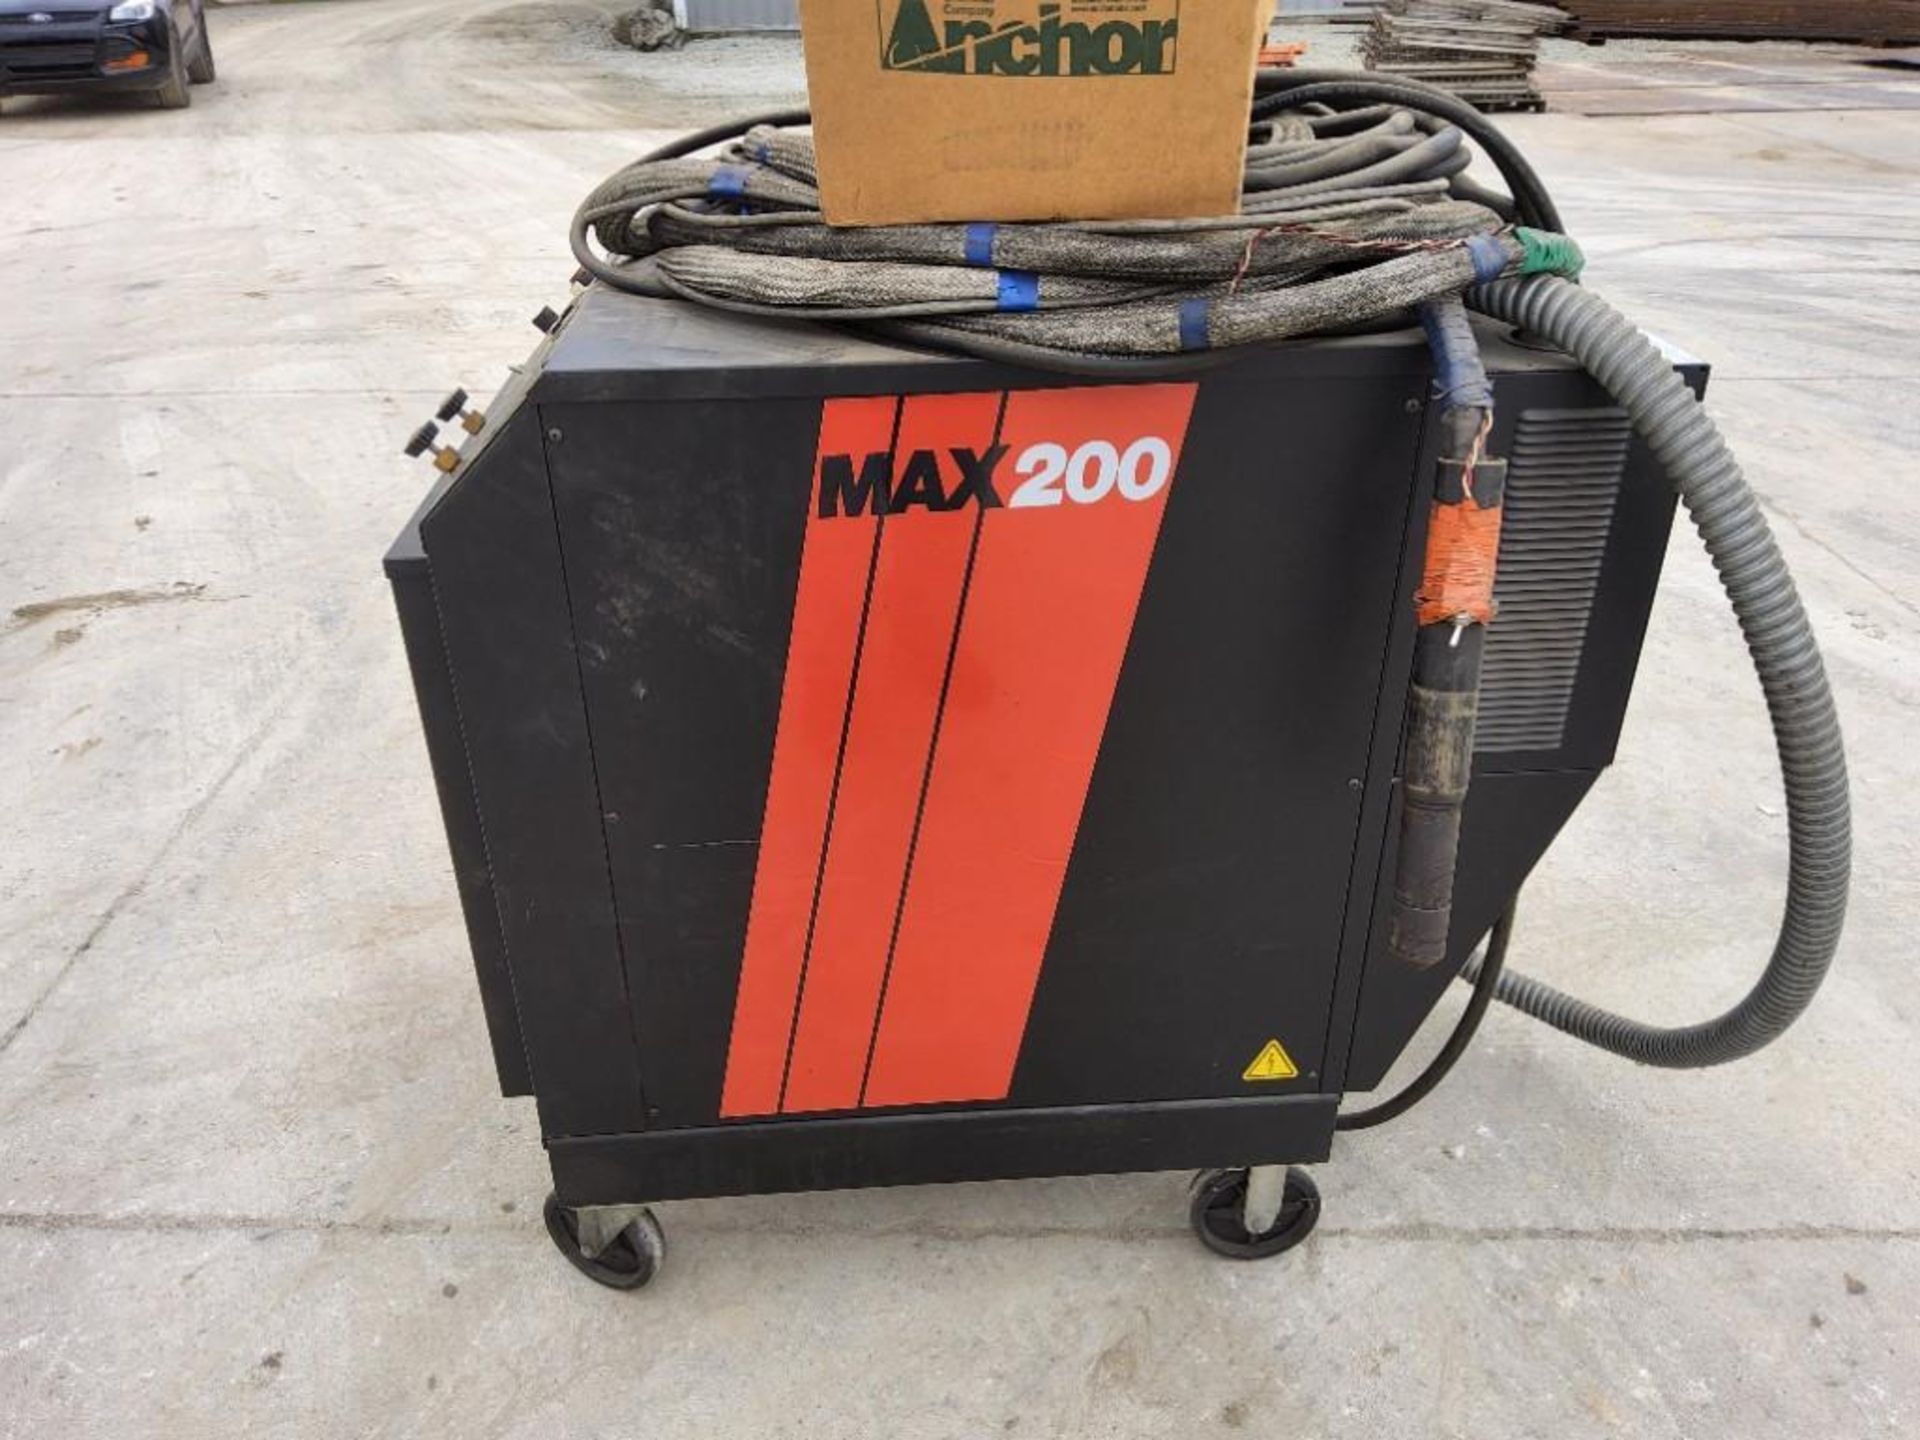 Hypertherm Max 200 Plasma Cutter - Image 6 of 8